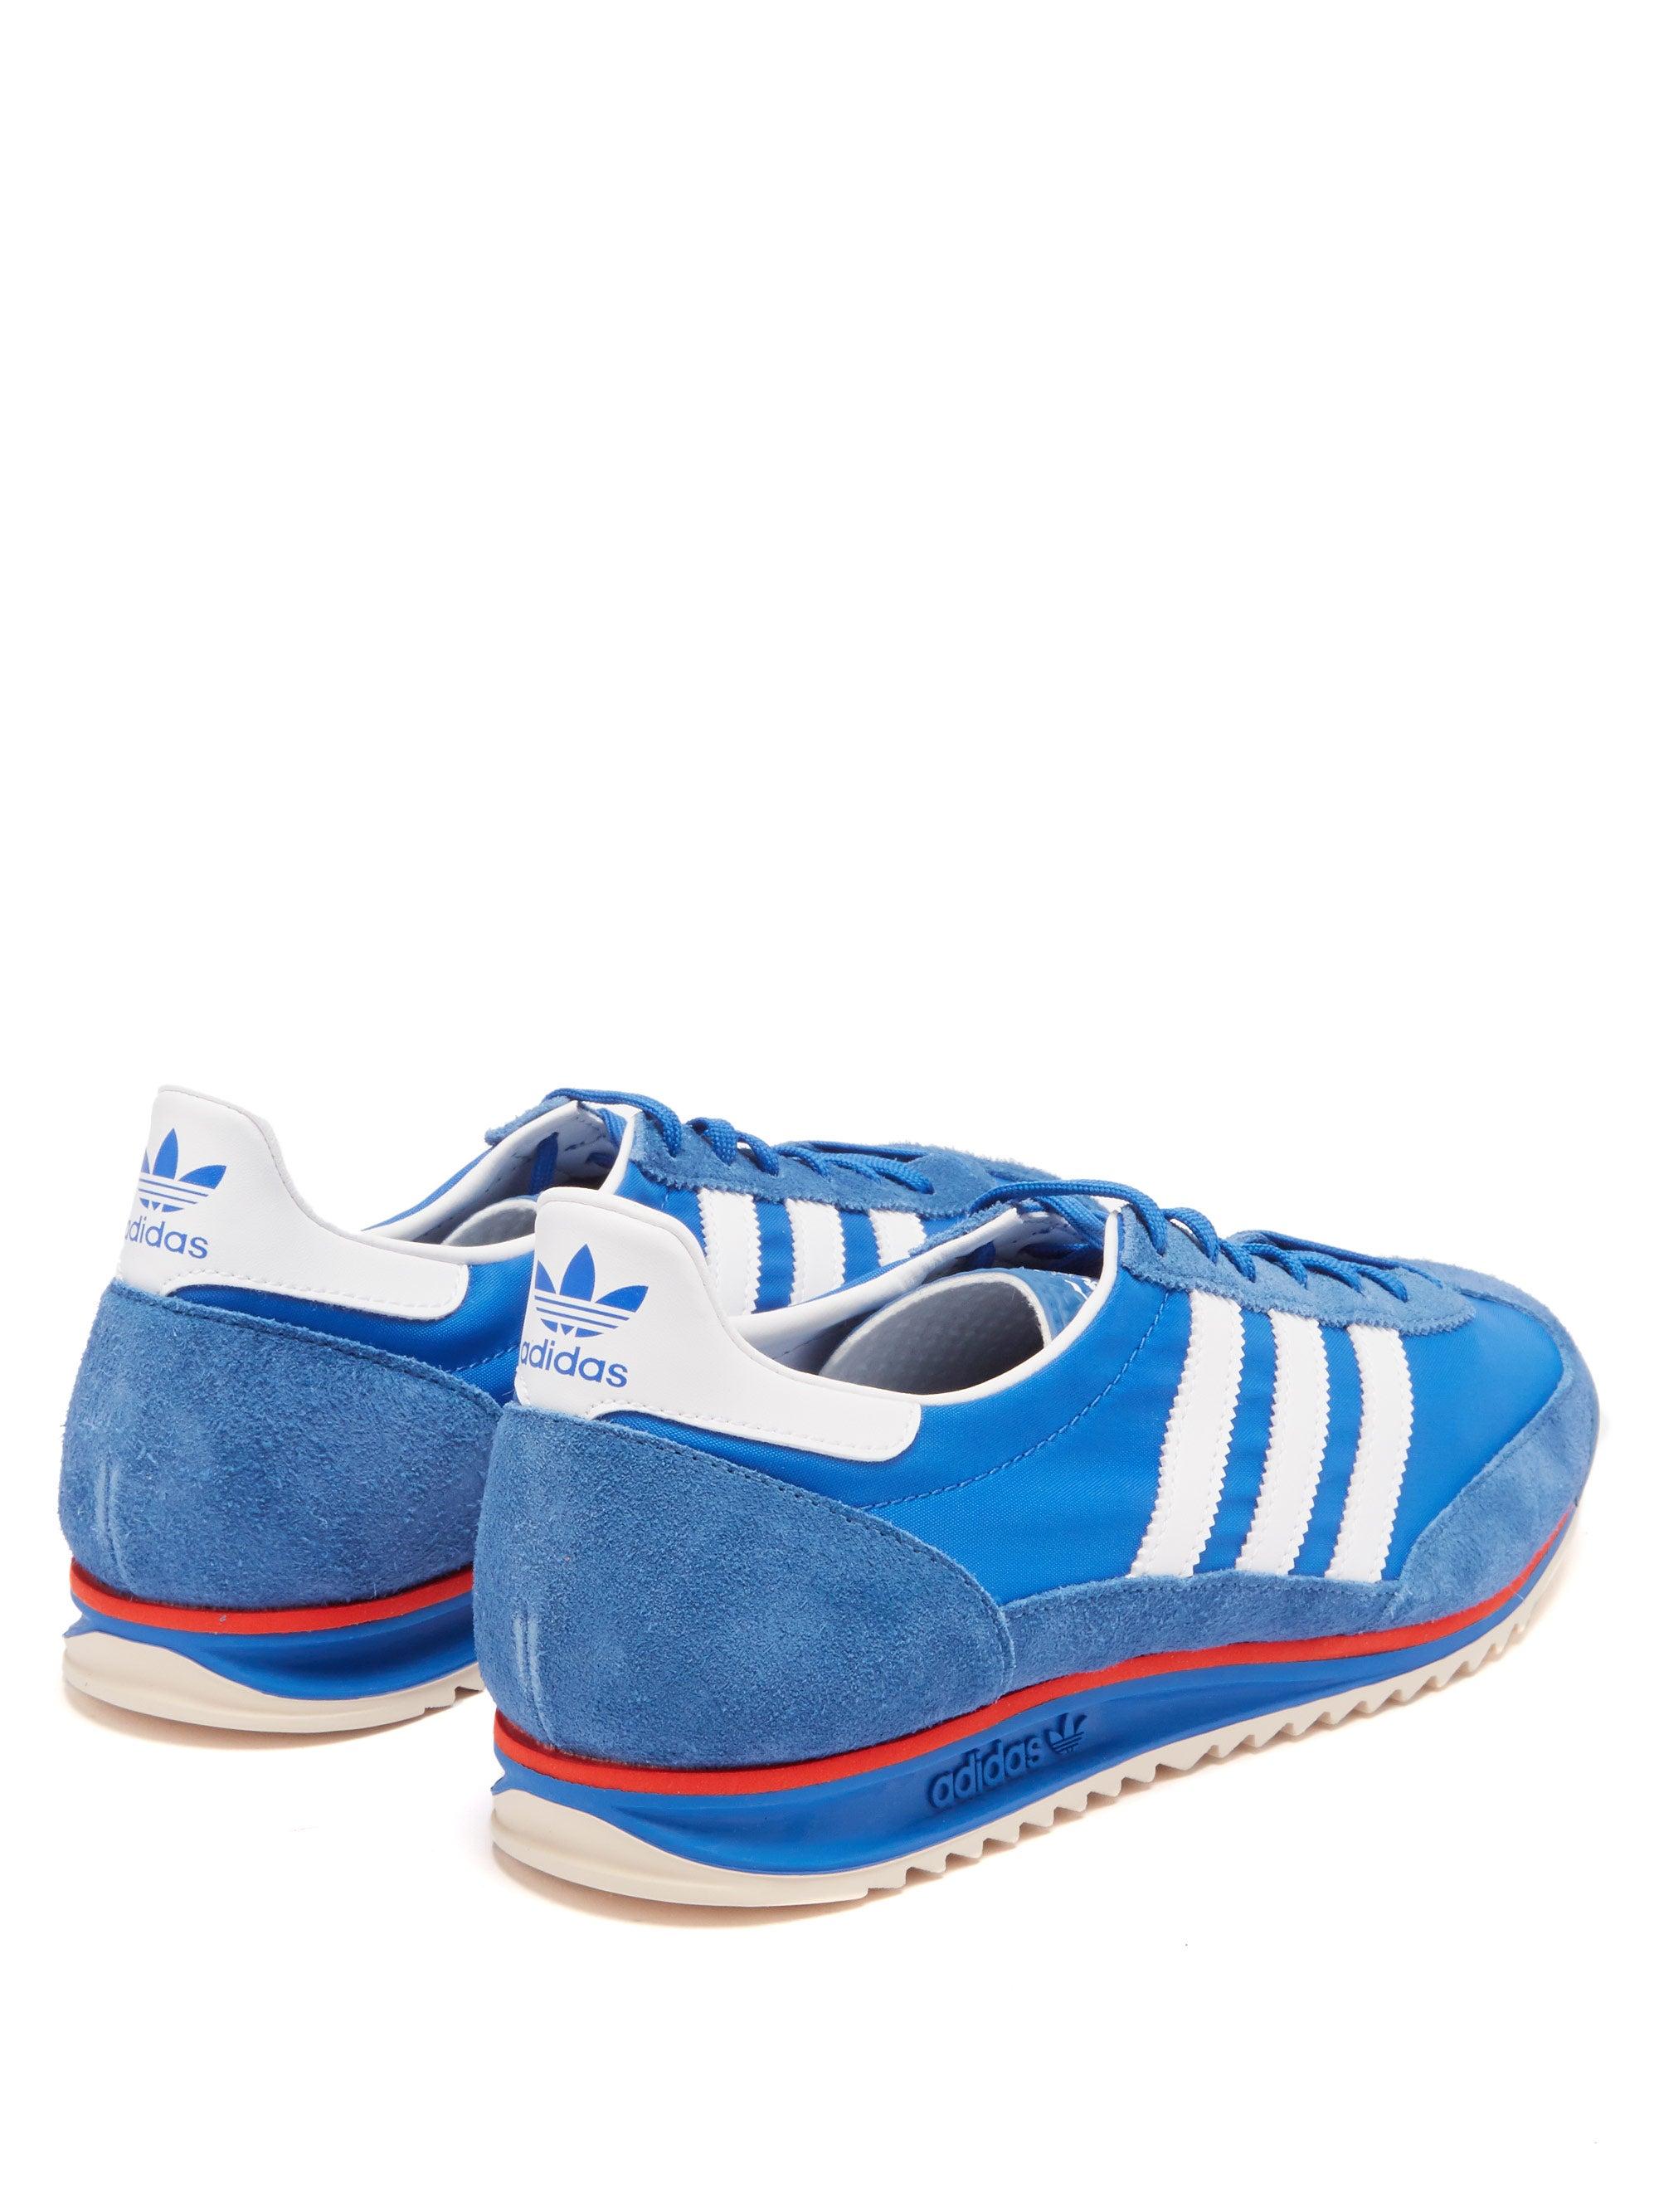 adidas blue canvas trainers